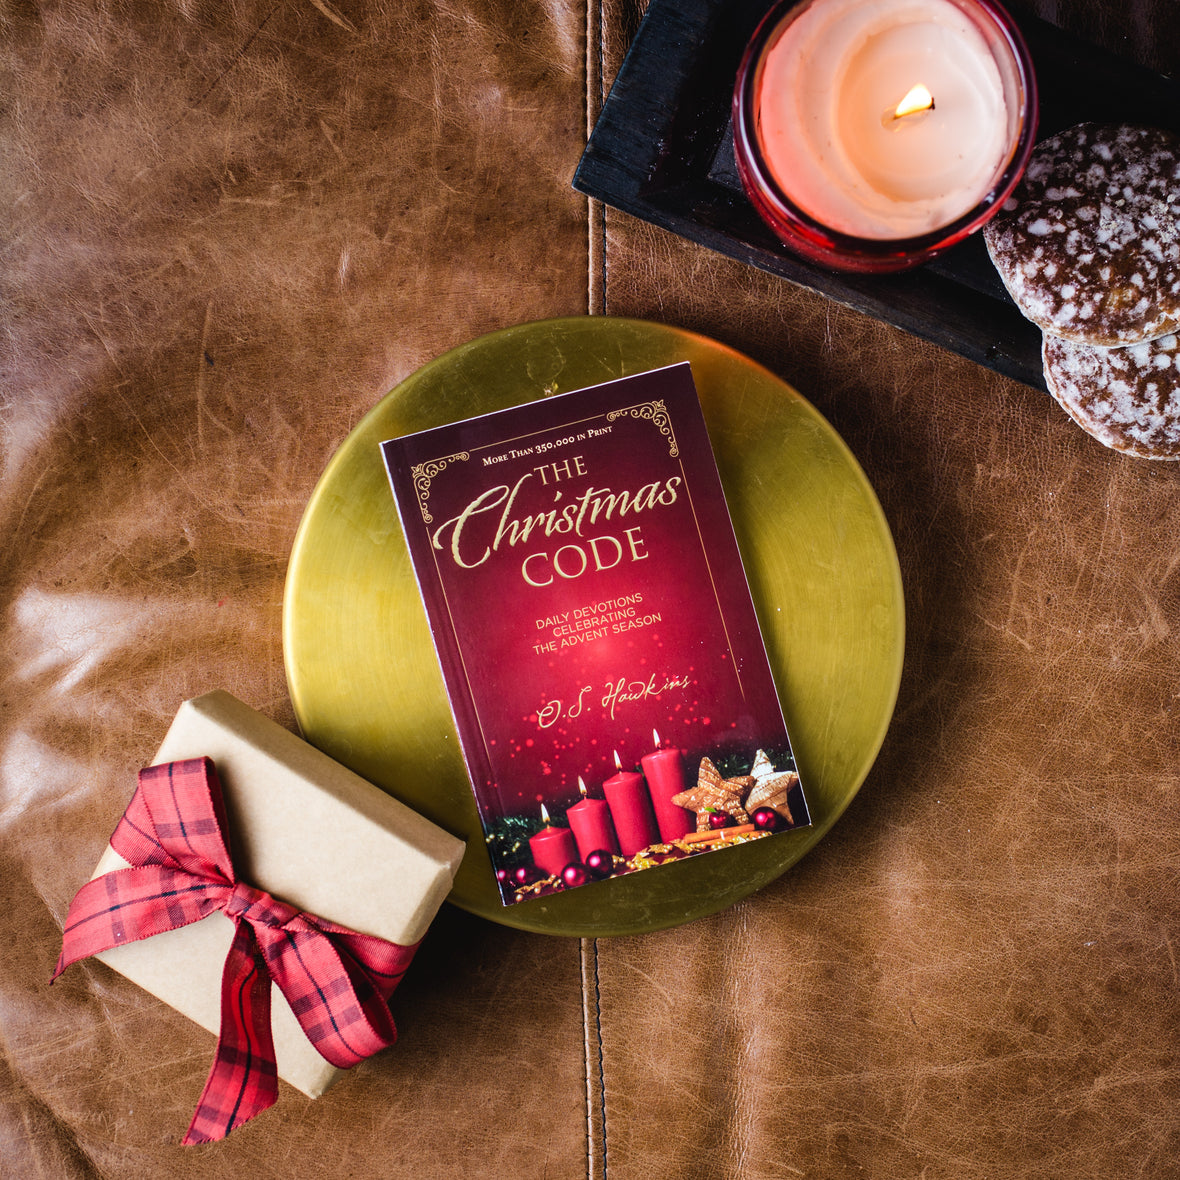 The Christmas Code: Daily Devotions Celebrating the Advent Season 25-pack